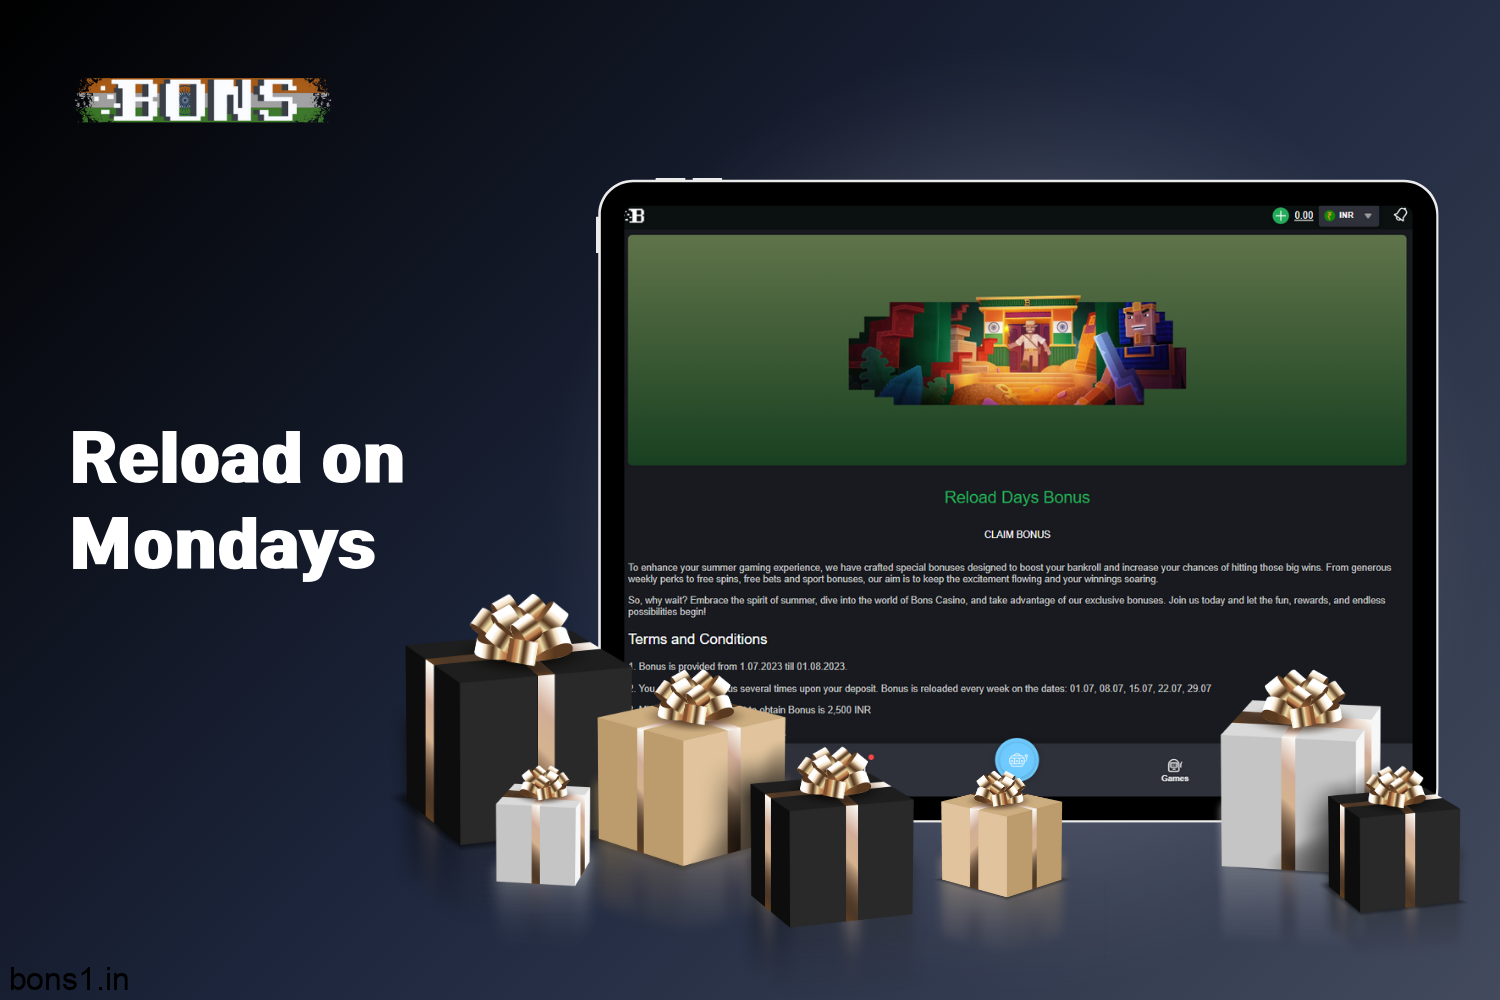 Bons Casino offers reload on Mondays for users from India